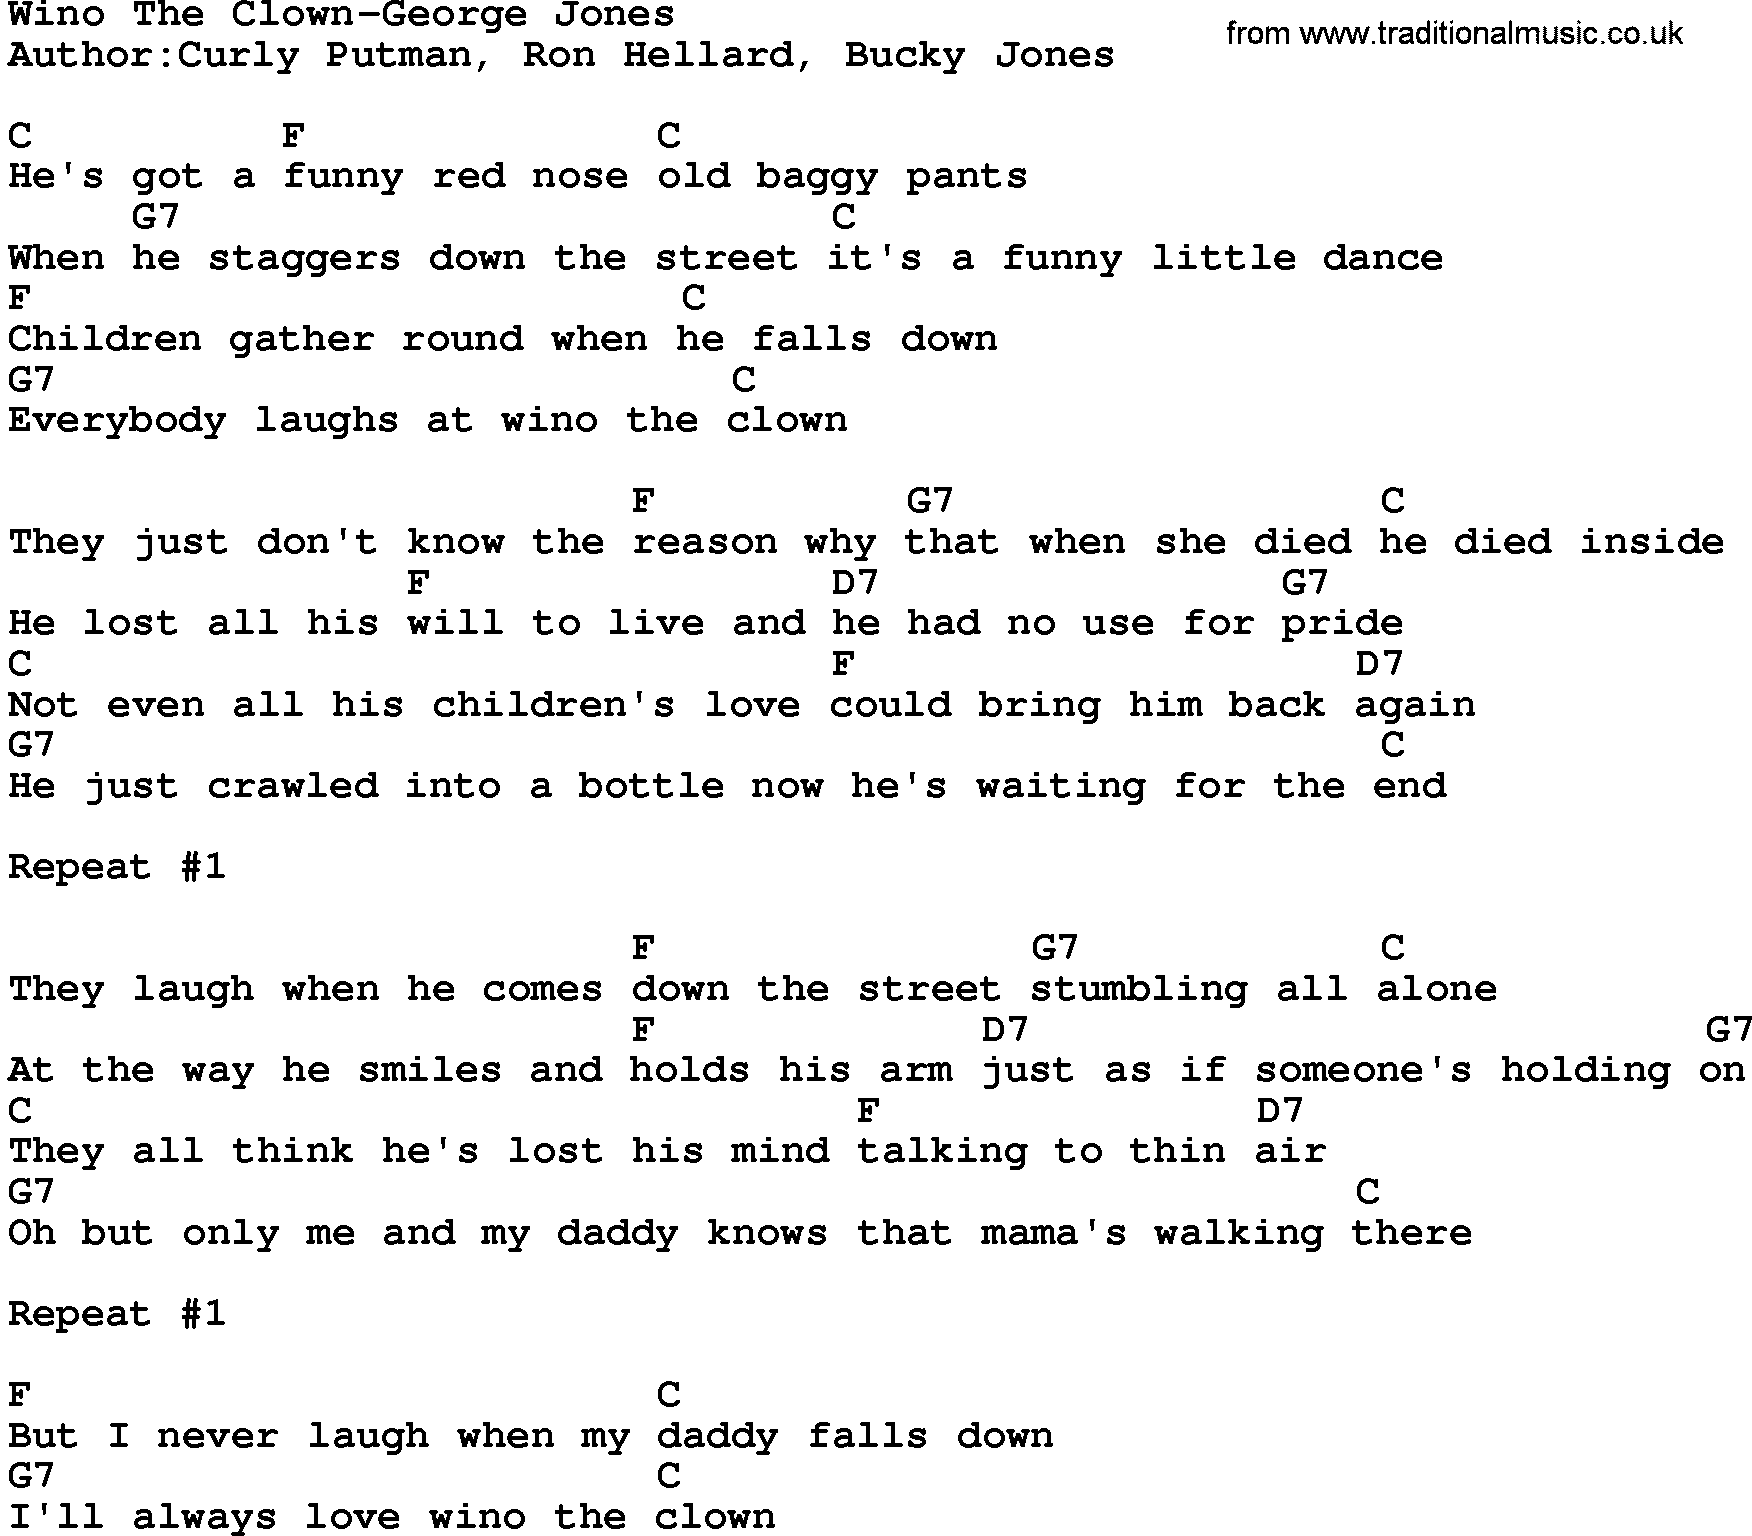 Country music song: Wino The Clown-George Jones lyrics and chords